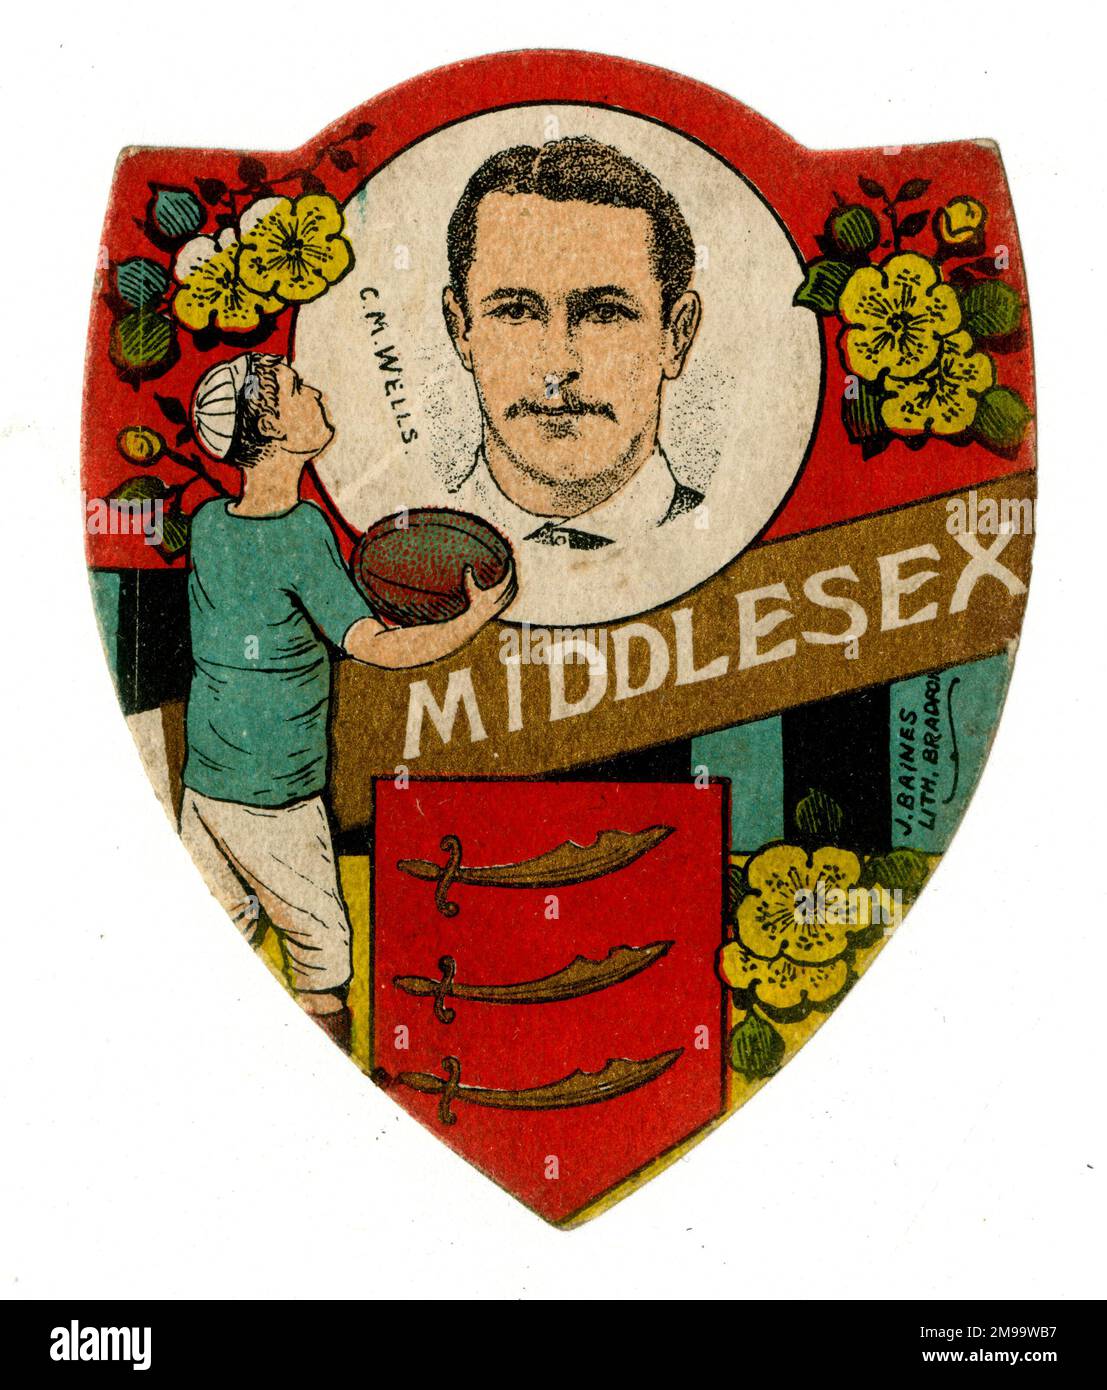 Cyril Mowbray Wells (1871-1963), Middlesex Rugby Player and first-class cricketer. Stock Photo